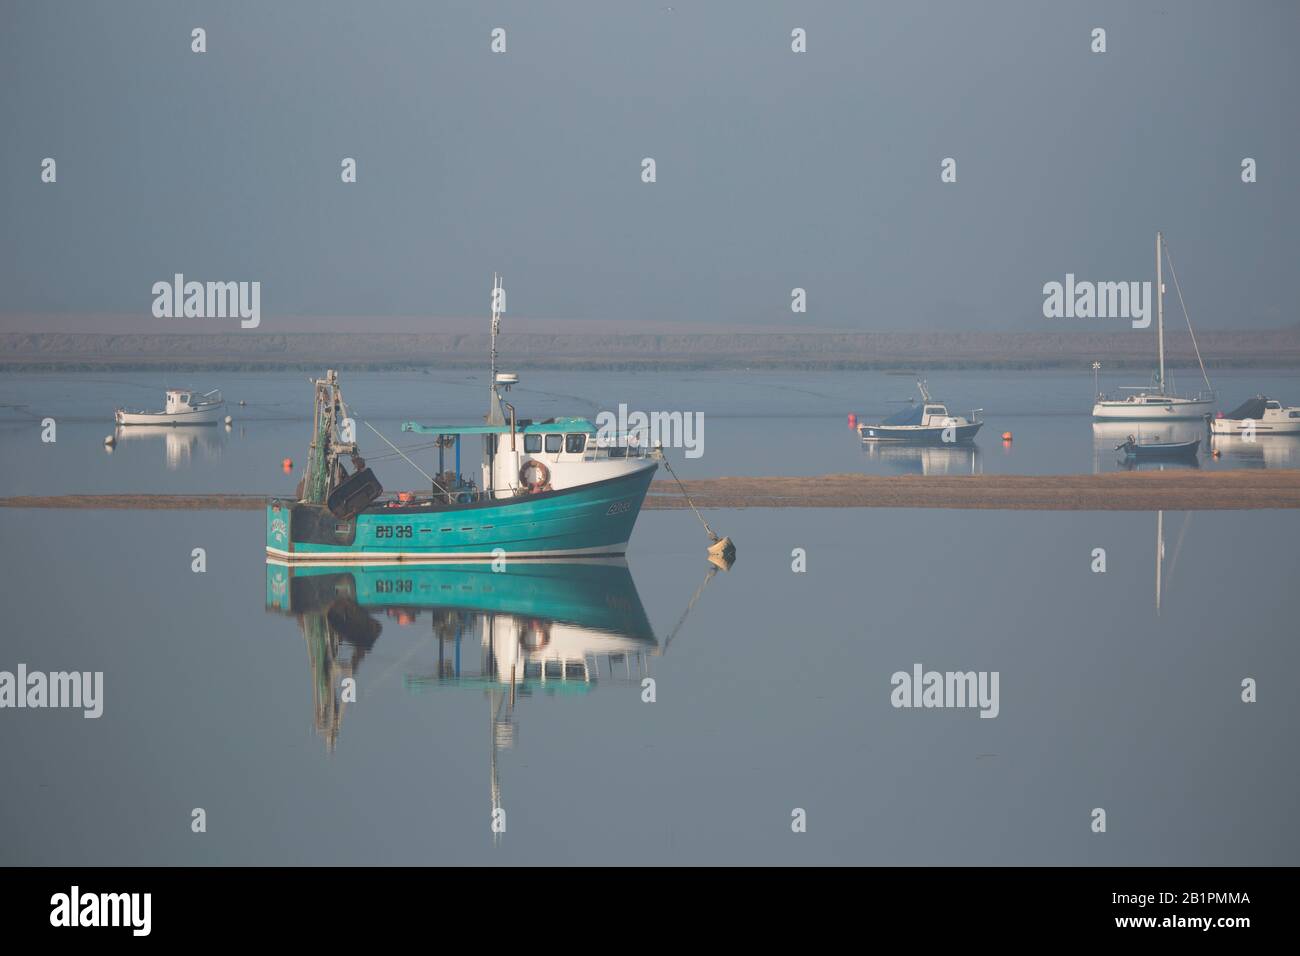 Fishing boats at anchor in the morning fog on an estuary Stock Photo